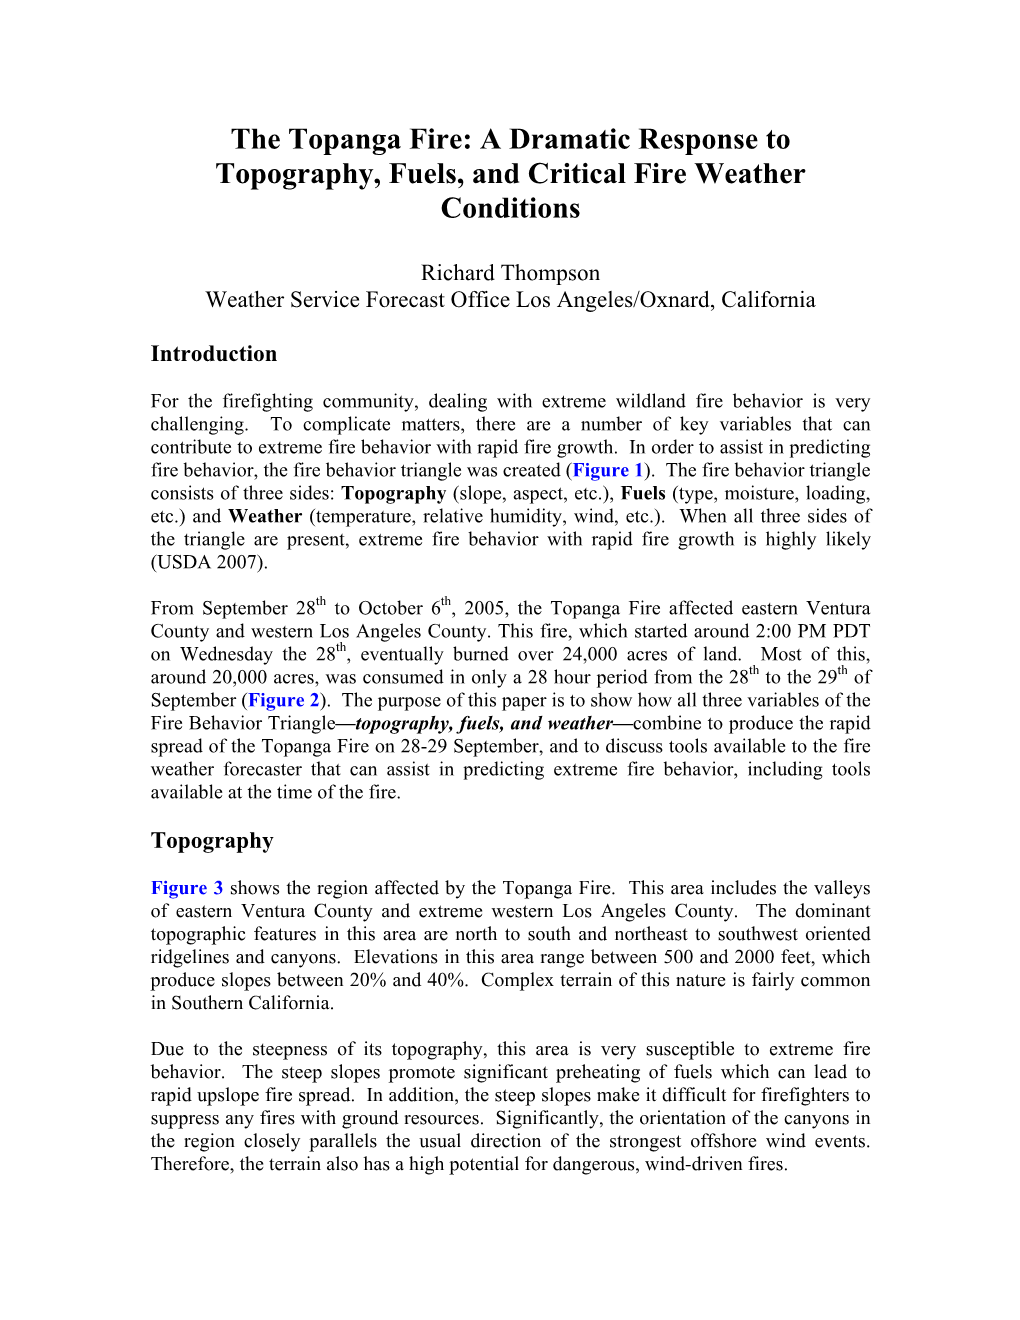 The Topanga Fire: a Dramatic Response to Topography, Fuels, and Critical Fire Weather Conditions